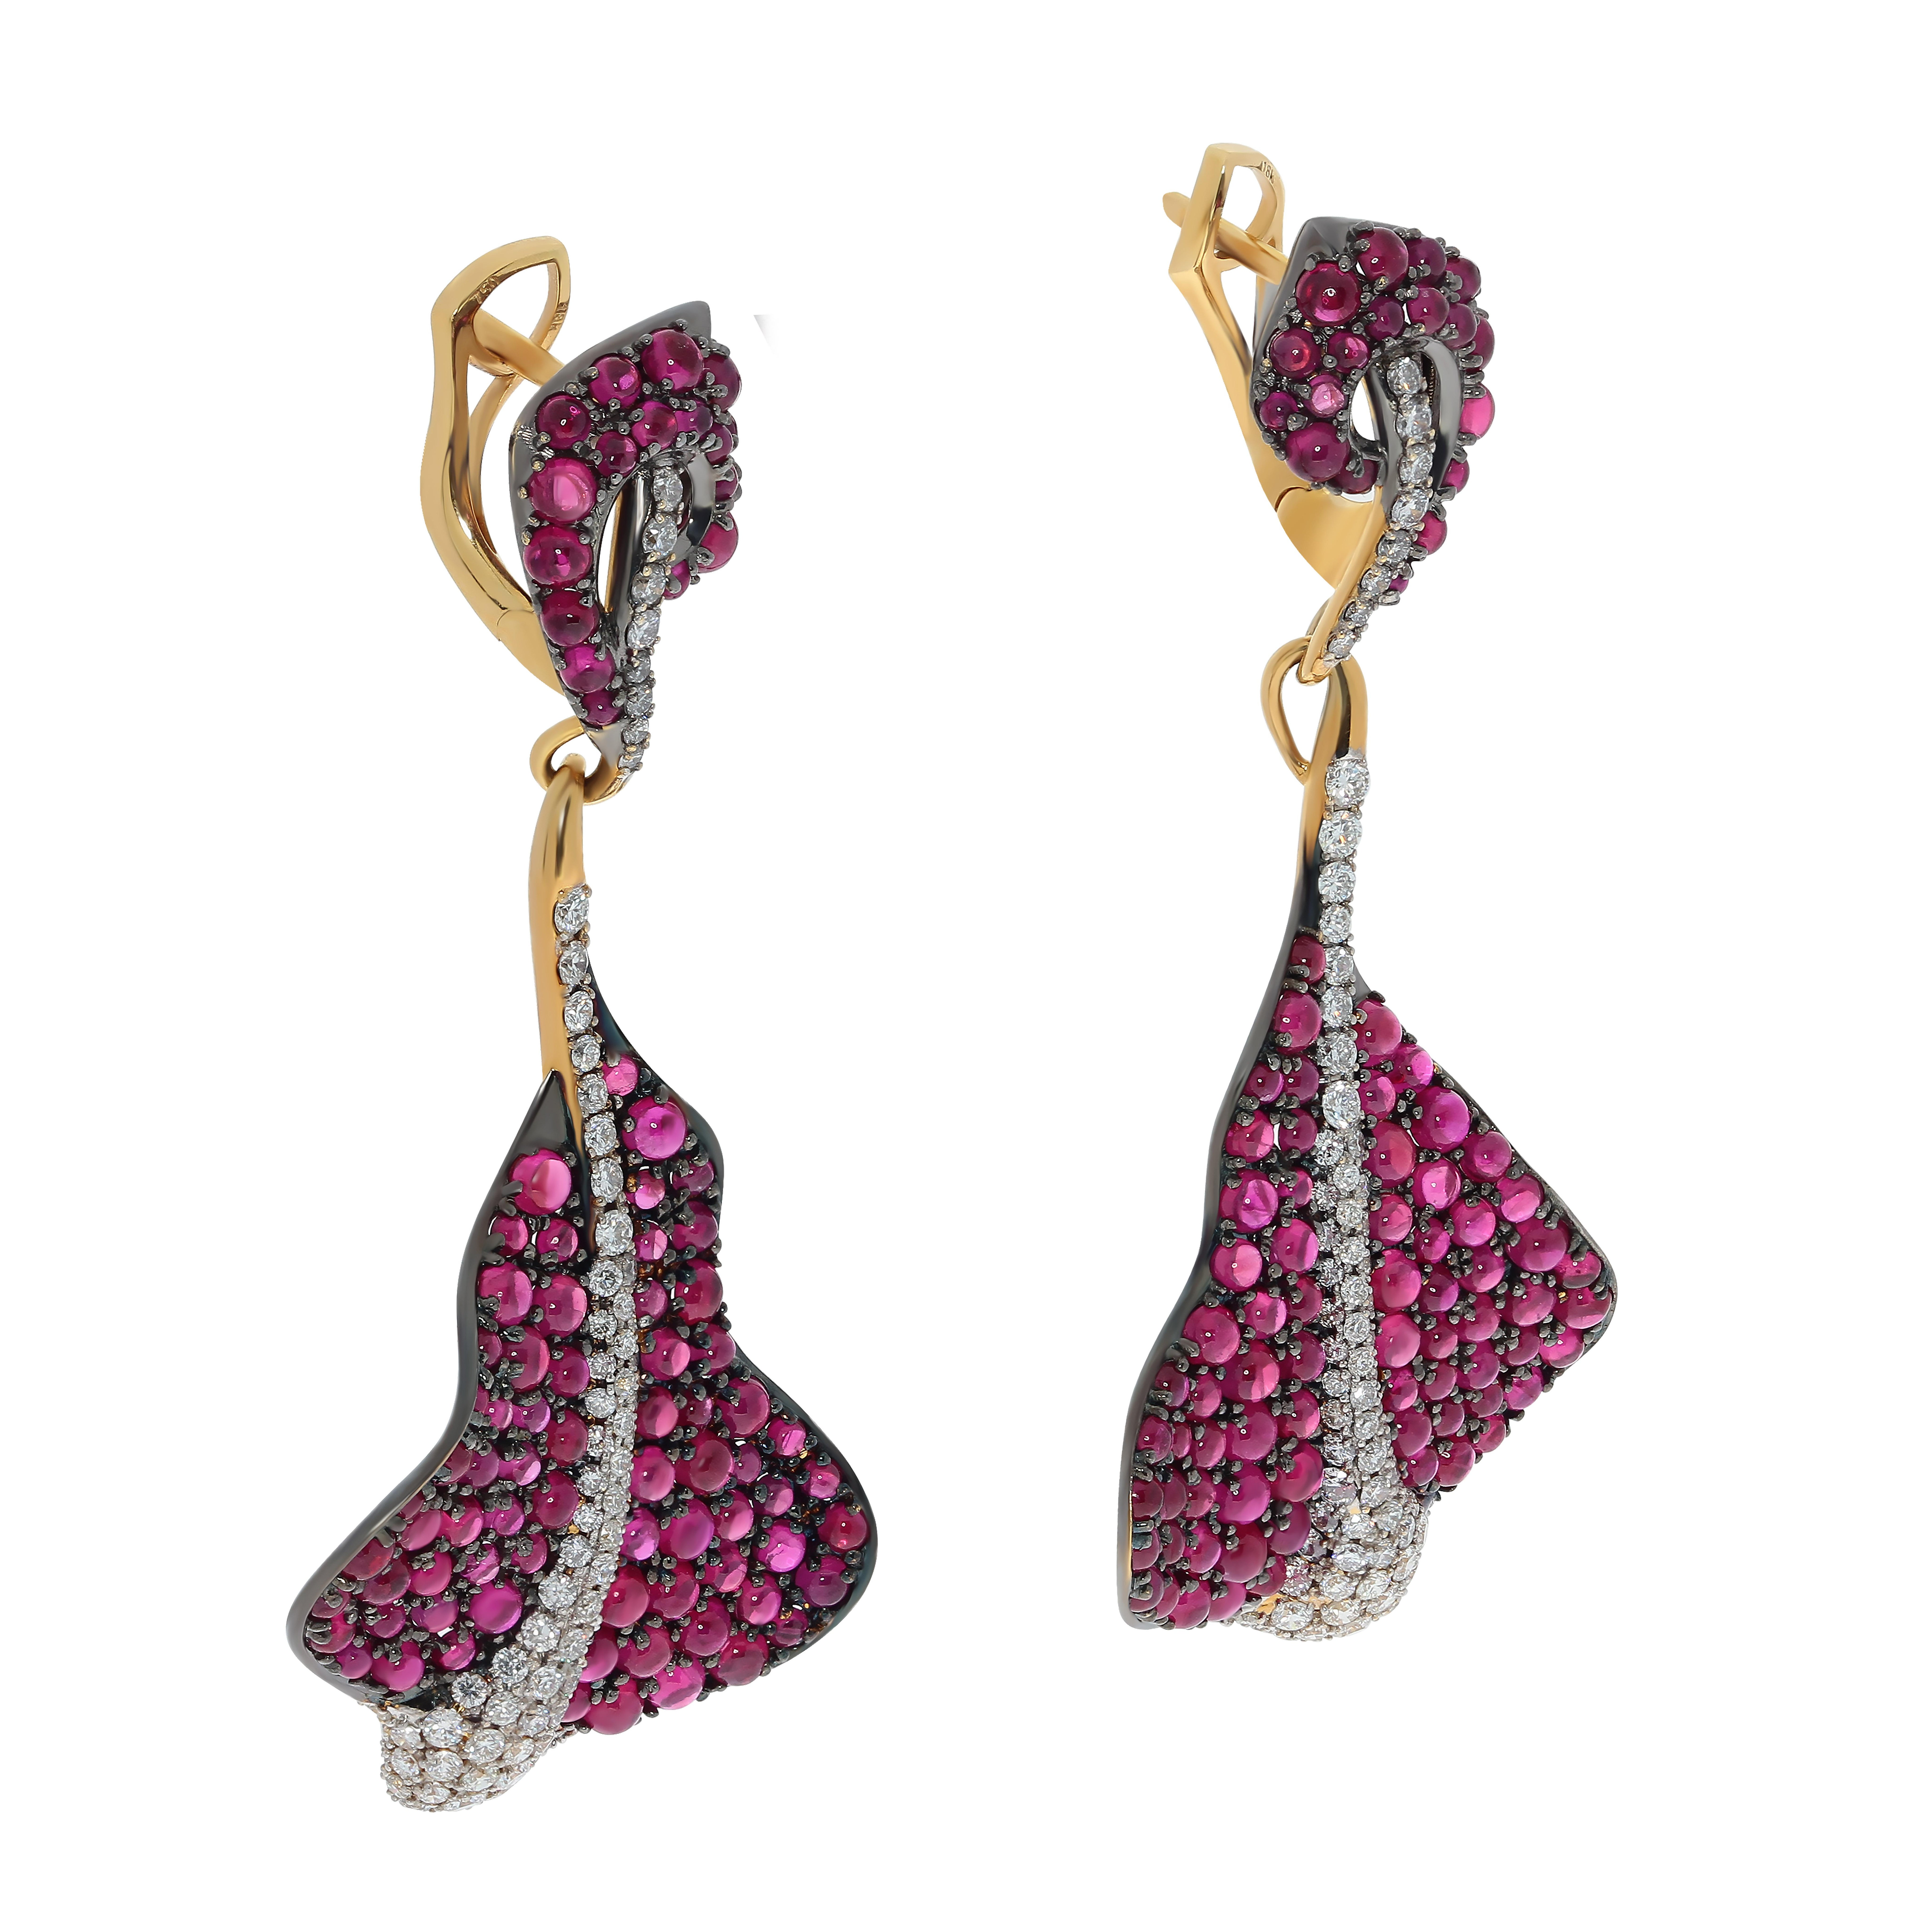 Ruby Cabochon Diamonds 18 Karat Yellow and Black Gold Stingray Earrings
When the summer leaves, for some reason exotic countries are recalled. Or just warm seas and their inhabitants. For example, a stingray. Earrings from the Eden Collection